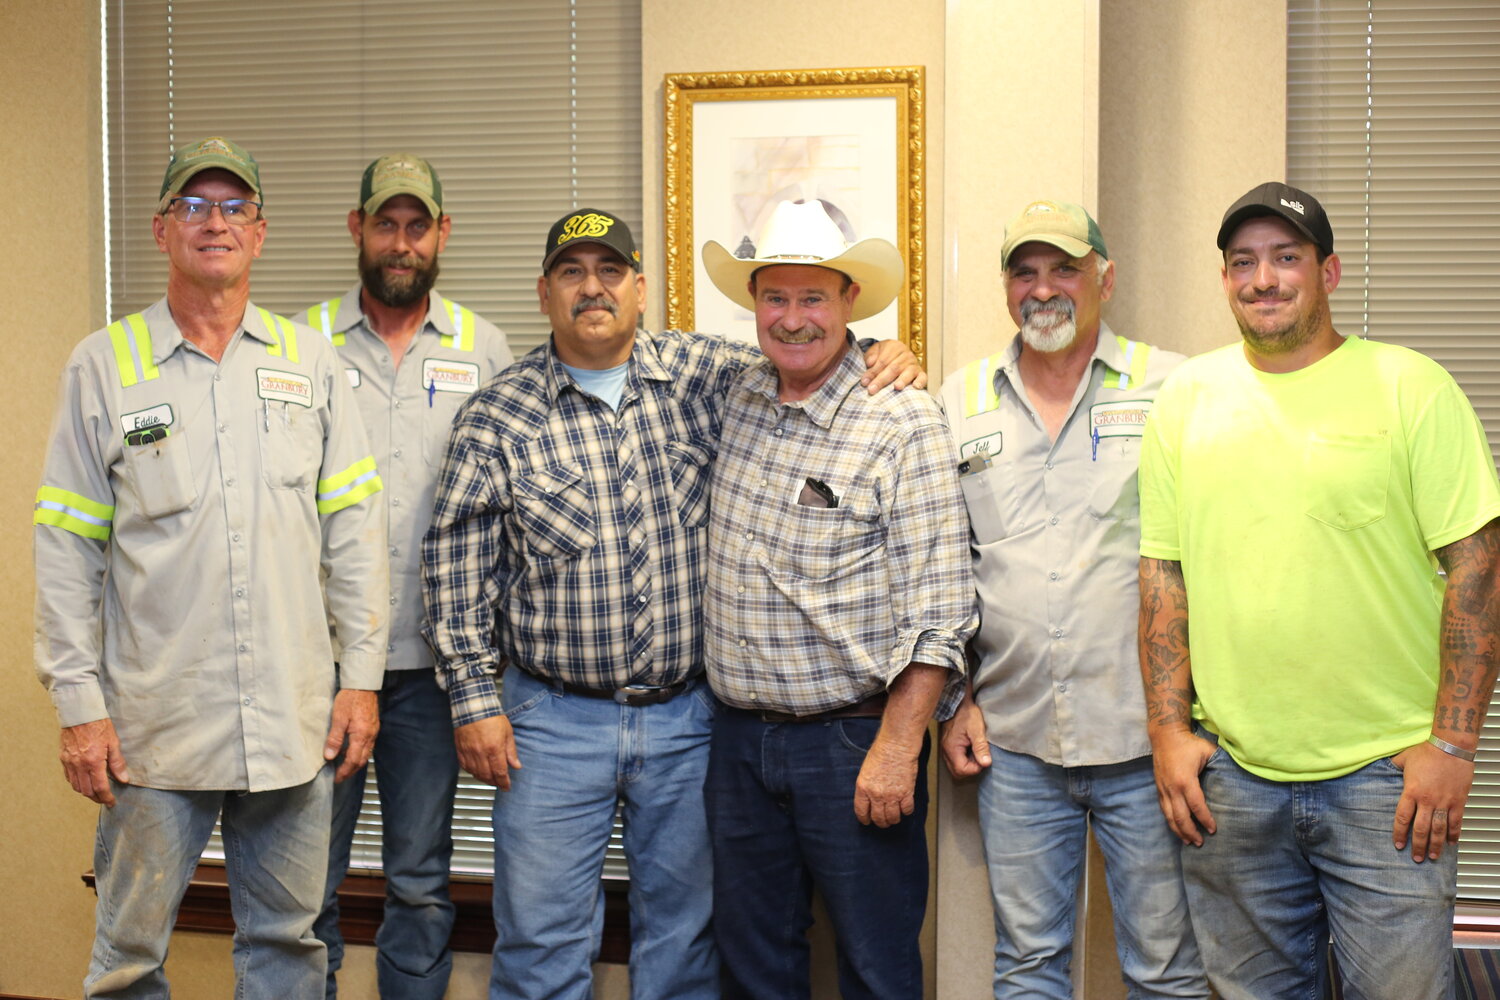 Granbury Assistant Public Works Director and longtime Tolar mayor Terry Johnson viewed his co-workers as a second family.